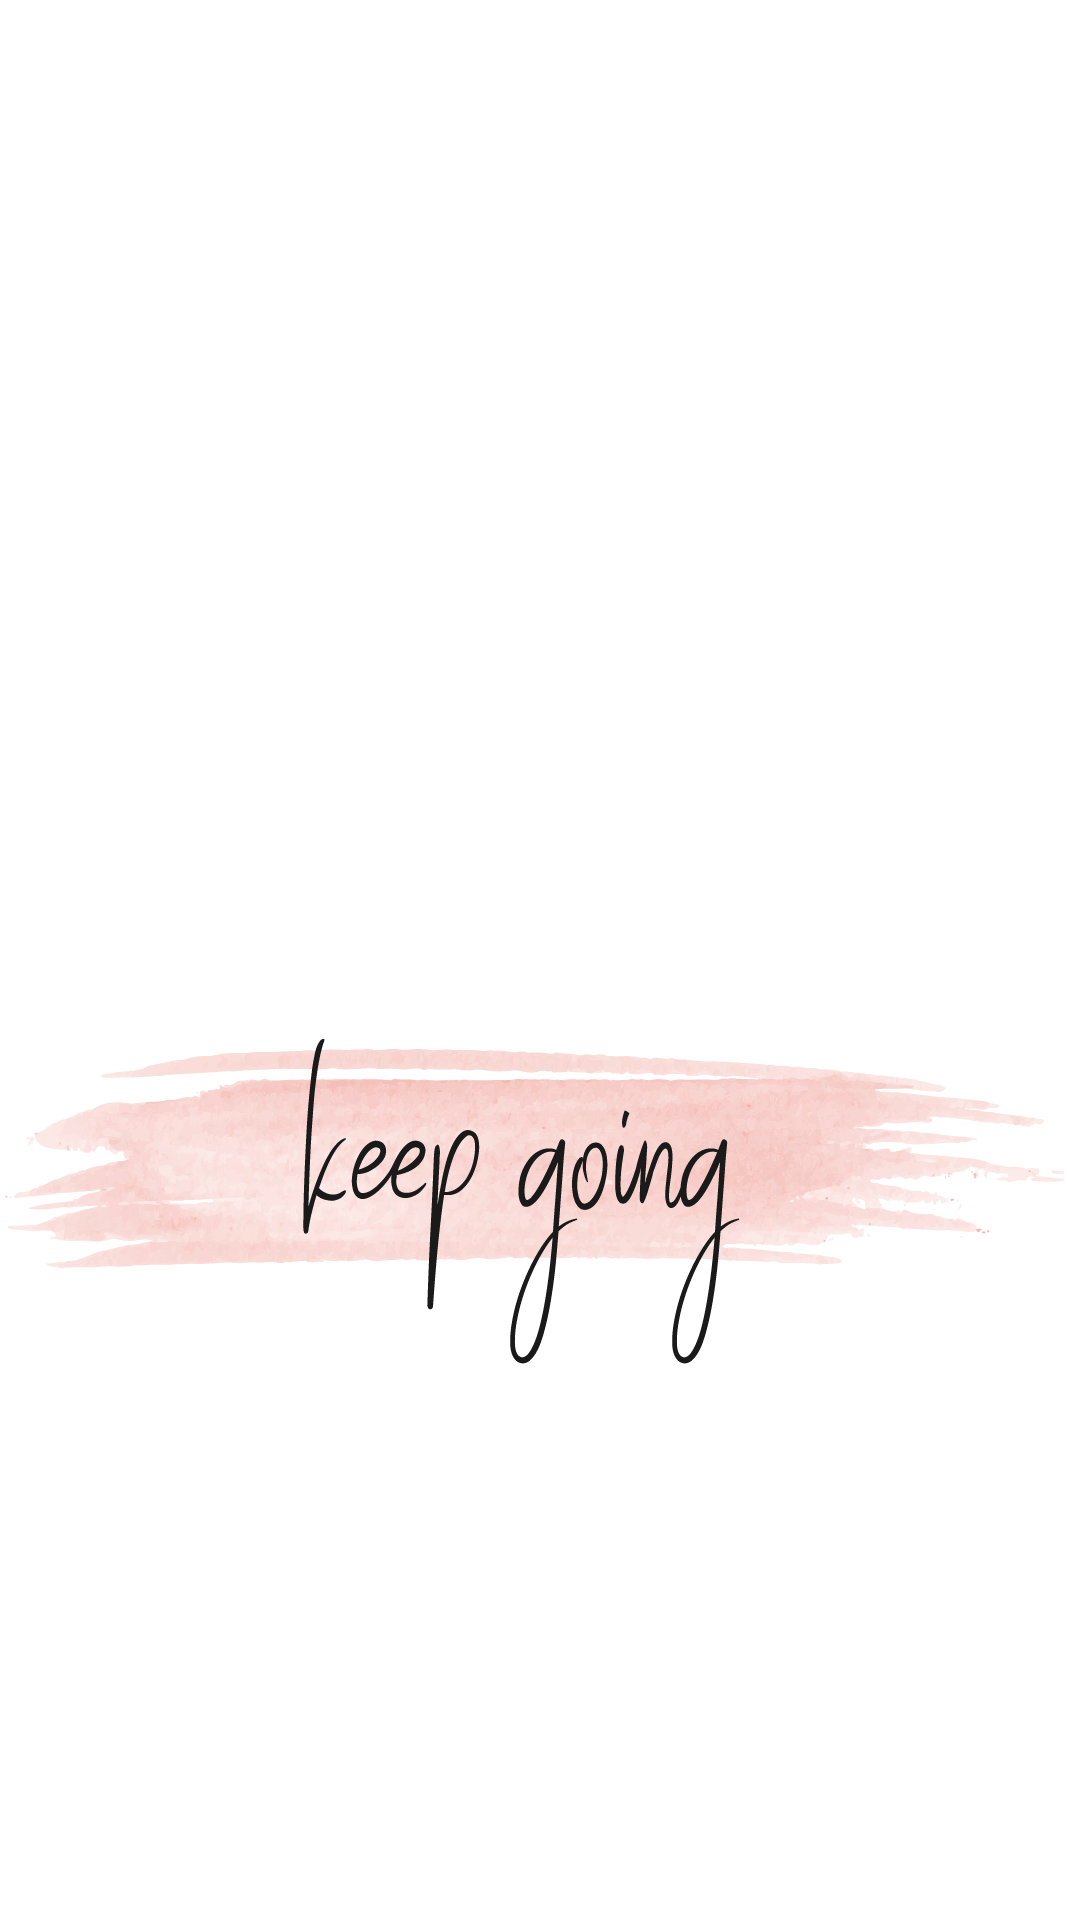 Keep Going paint stroke phone wallpaper motivational quote